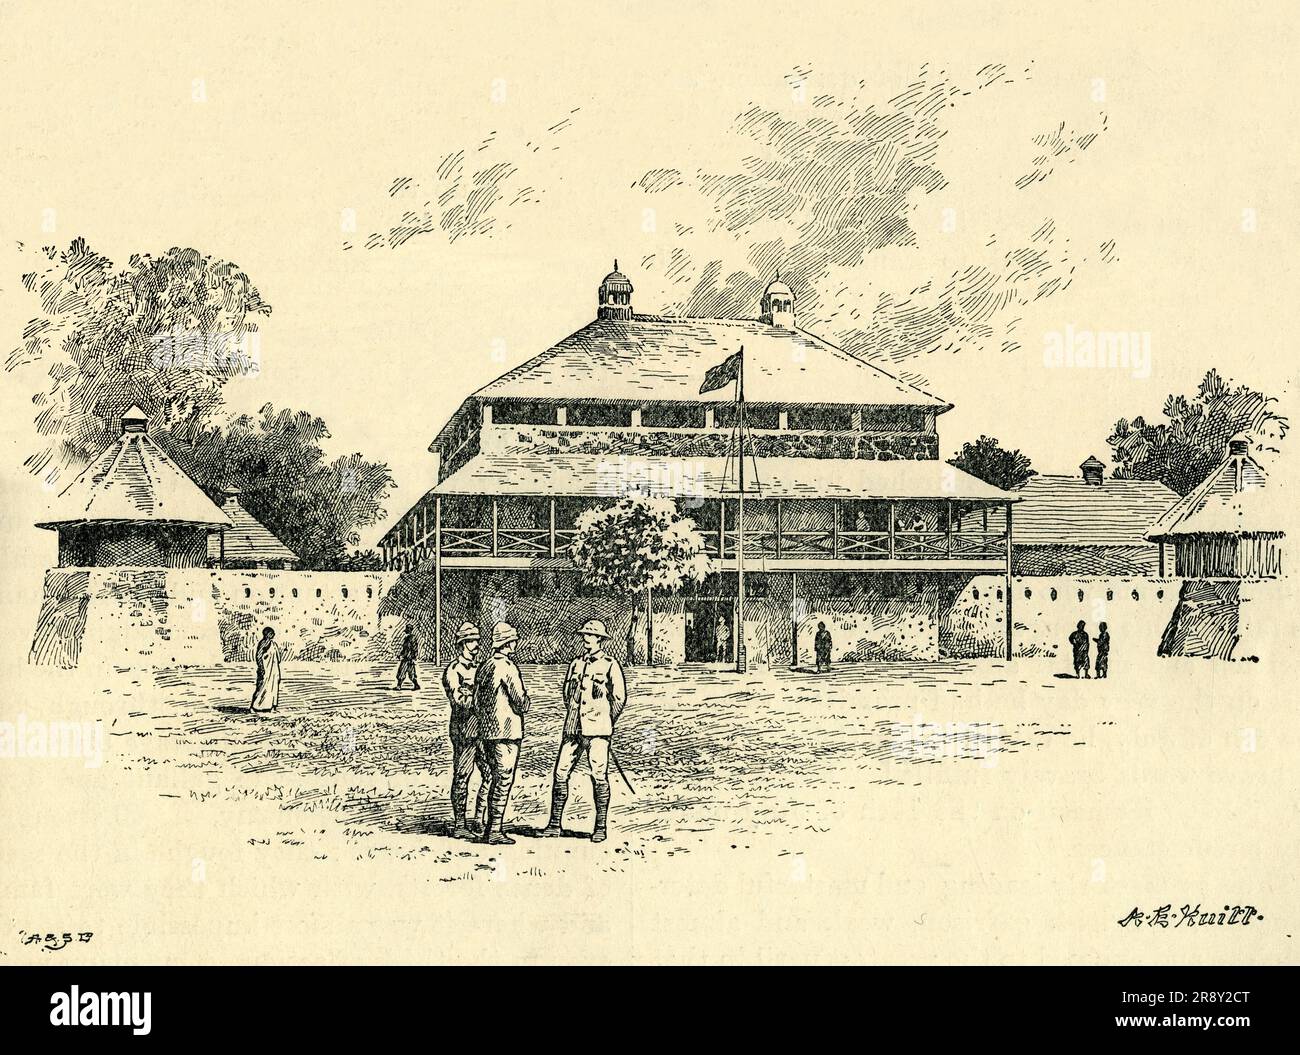 'The Fort at Kumasi', c1900. British army post during the Anglo-Ashanti wars in West Africa. From &quot;Cassell's History of England, Vol. IX&quot;. [Cassell and Company, Limited, London, Paris, New York &amp; Melbourne] Stock Photo